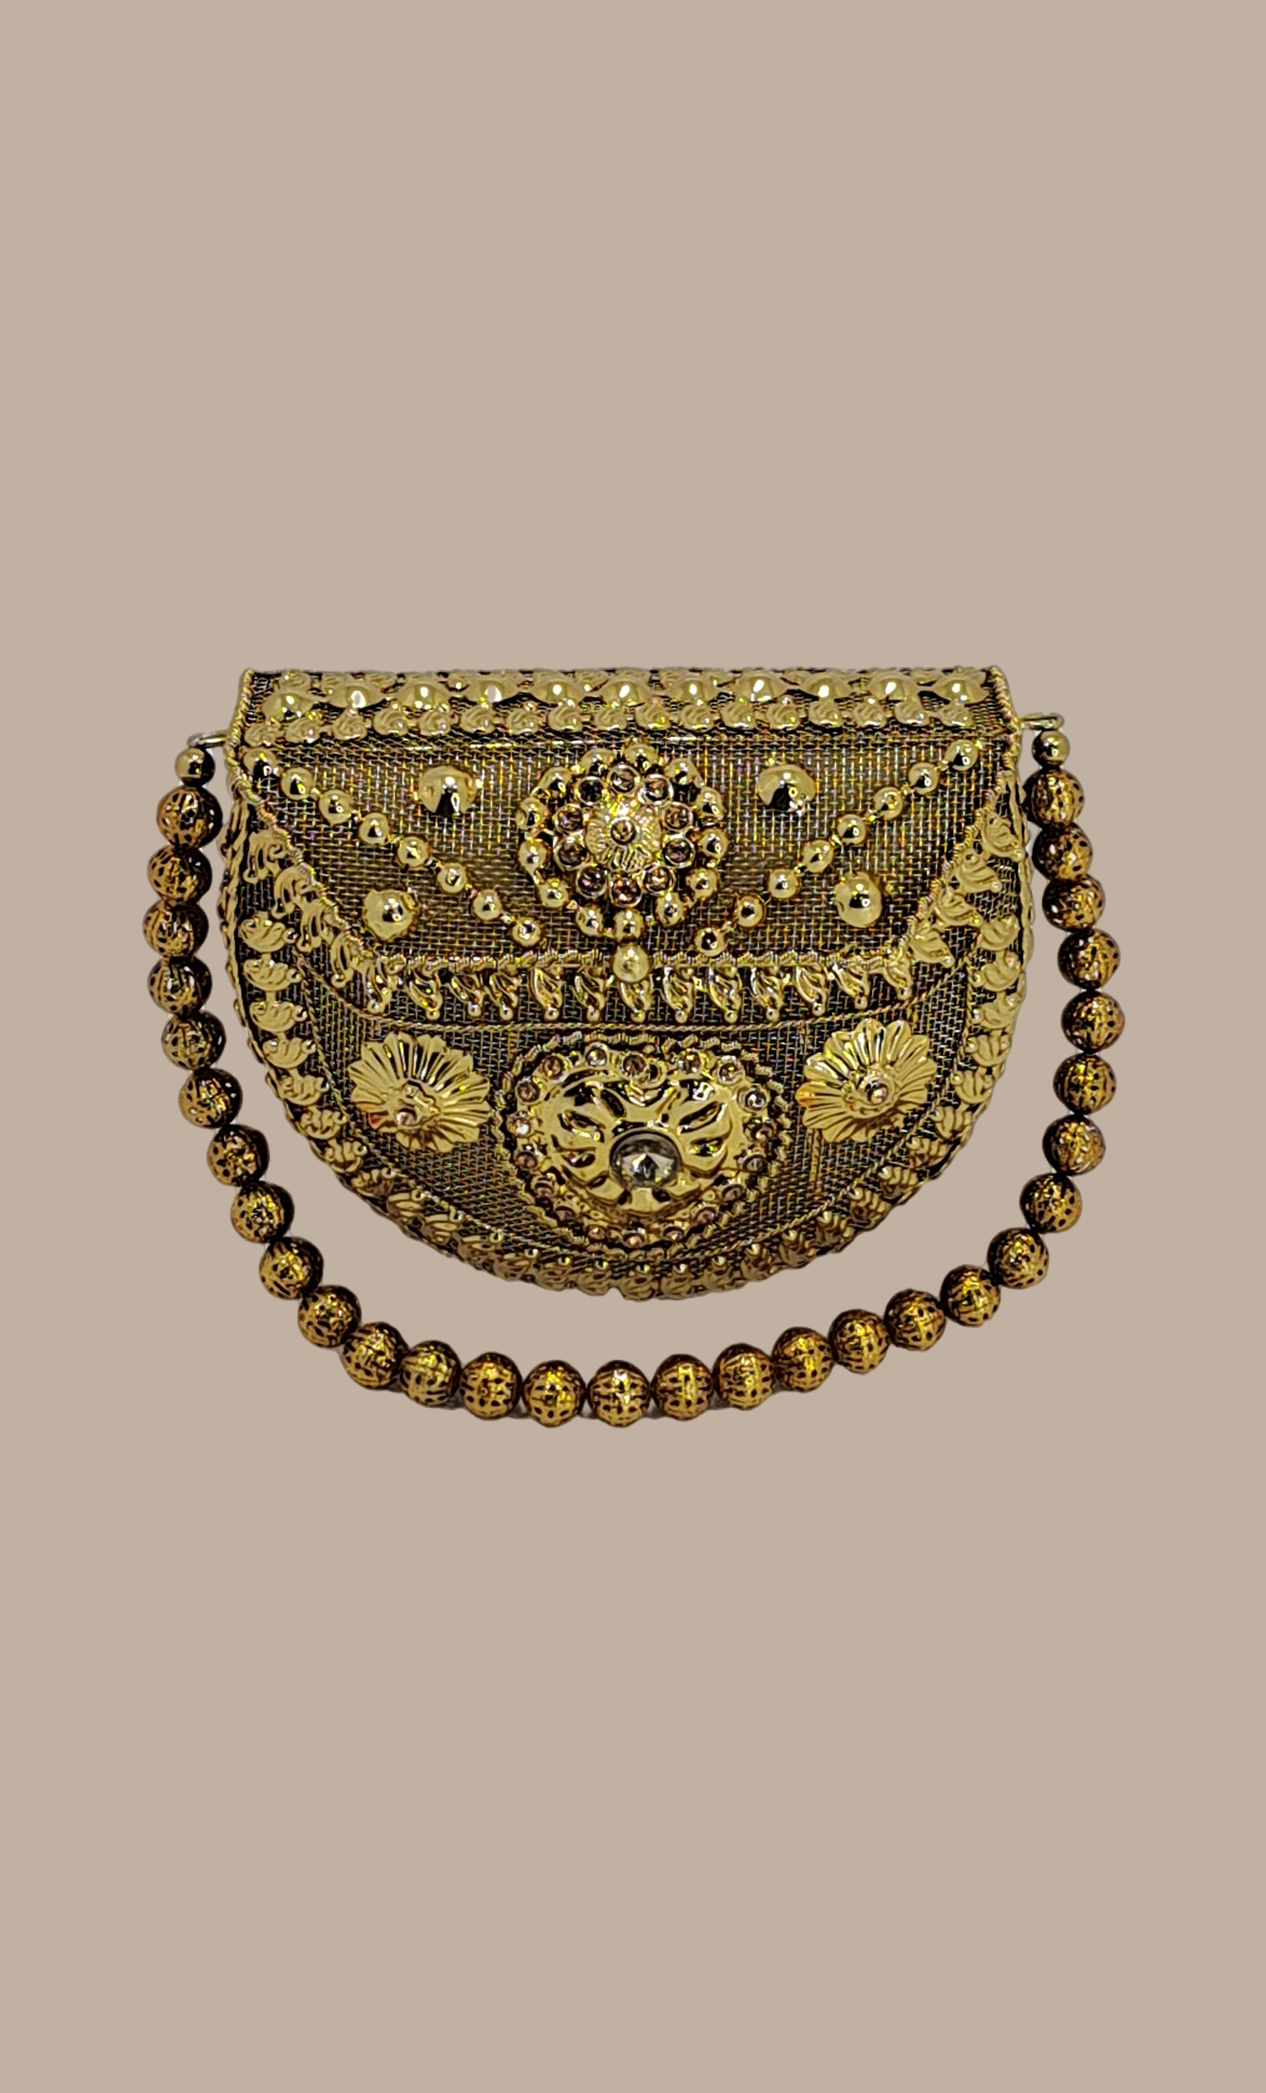 Small Gold Clutch Bag